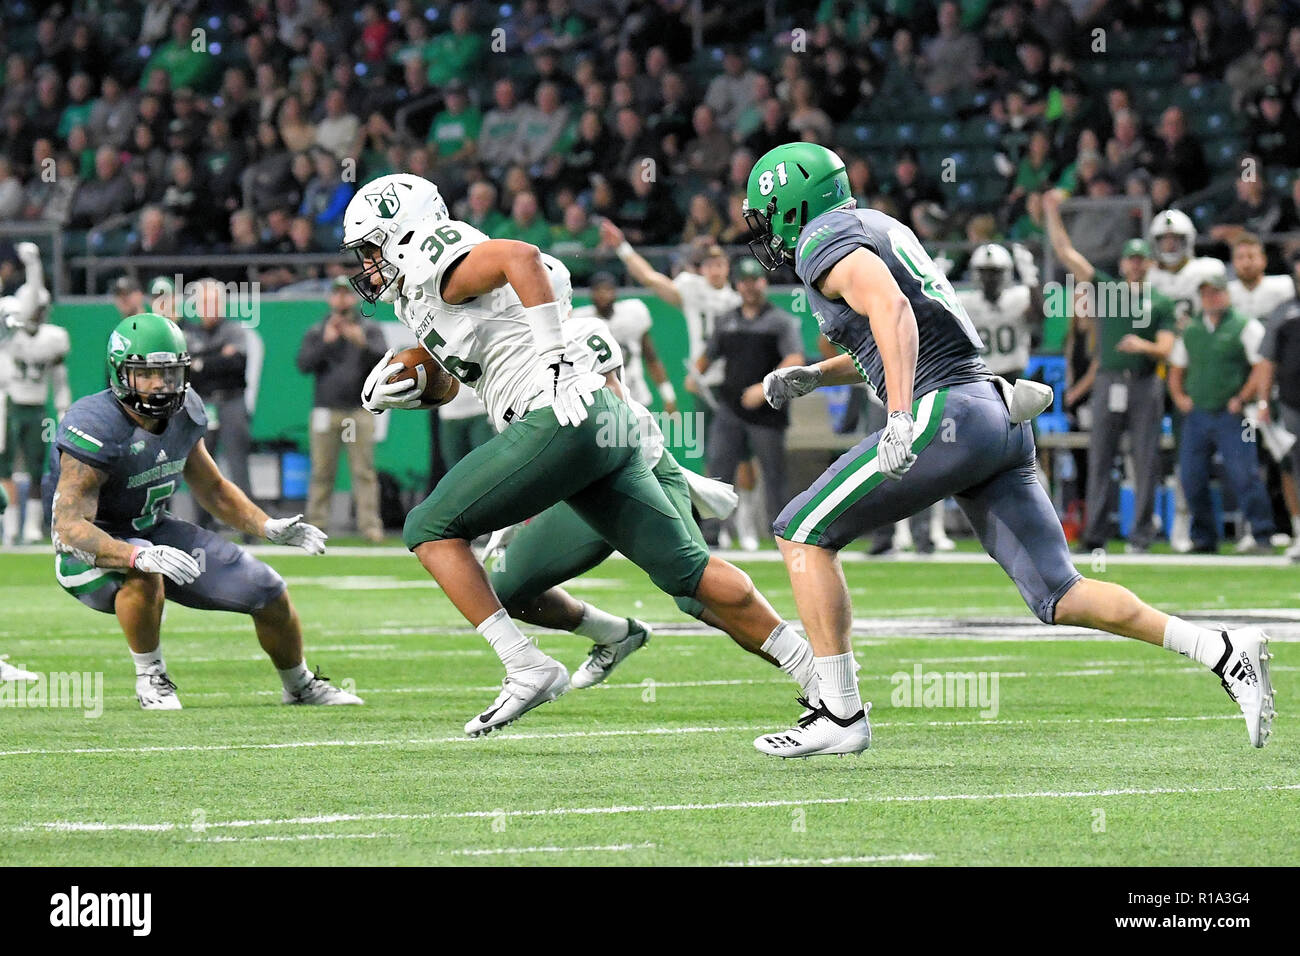 Grand Forks, ND, USA. 10th Nov, 2018. North Dakota Fighting Hawks wide receiver Luke Stanley (81) purses Portland State Vikings linebacker Sam Bodine (36) after he intercepted a pass during a NCAA football game between the Portland State Vikings and the University of North Dakota Fighting Hawks at the Alerus Center in Grand Forks, ND. North Dakota defeated Portland State 17-10. Russell Hons/CSM/Alamy Live News Stock Photo